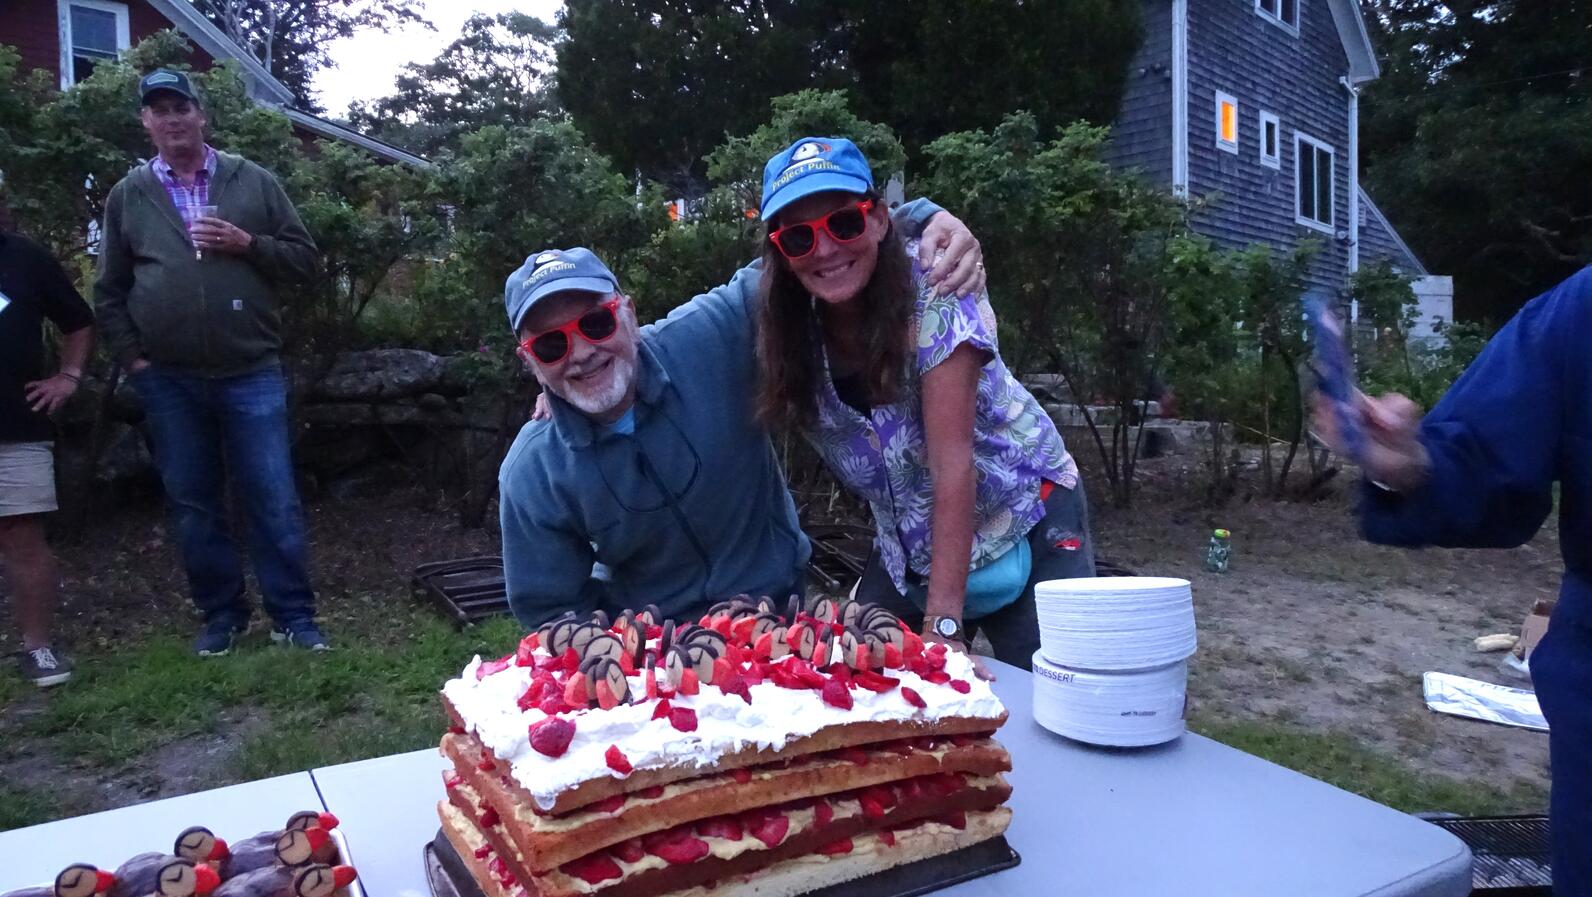 Steve Kress and Seabird Sue Schubel with Raft of Puffins Cake